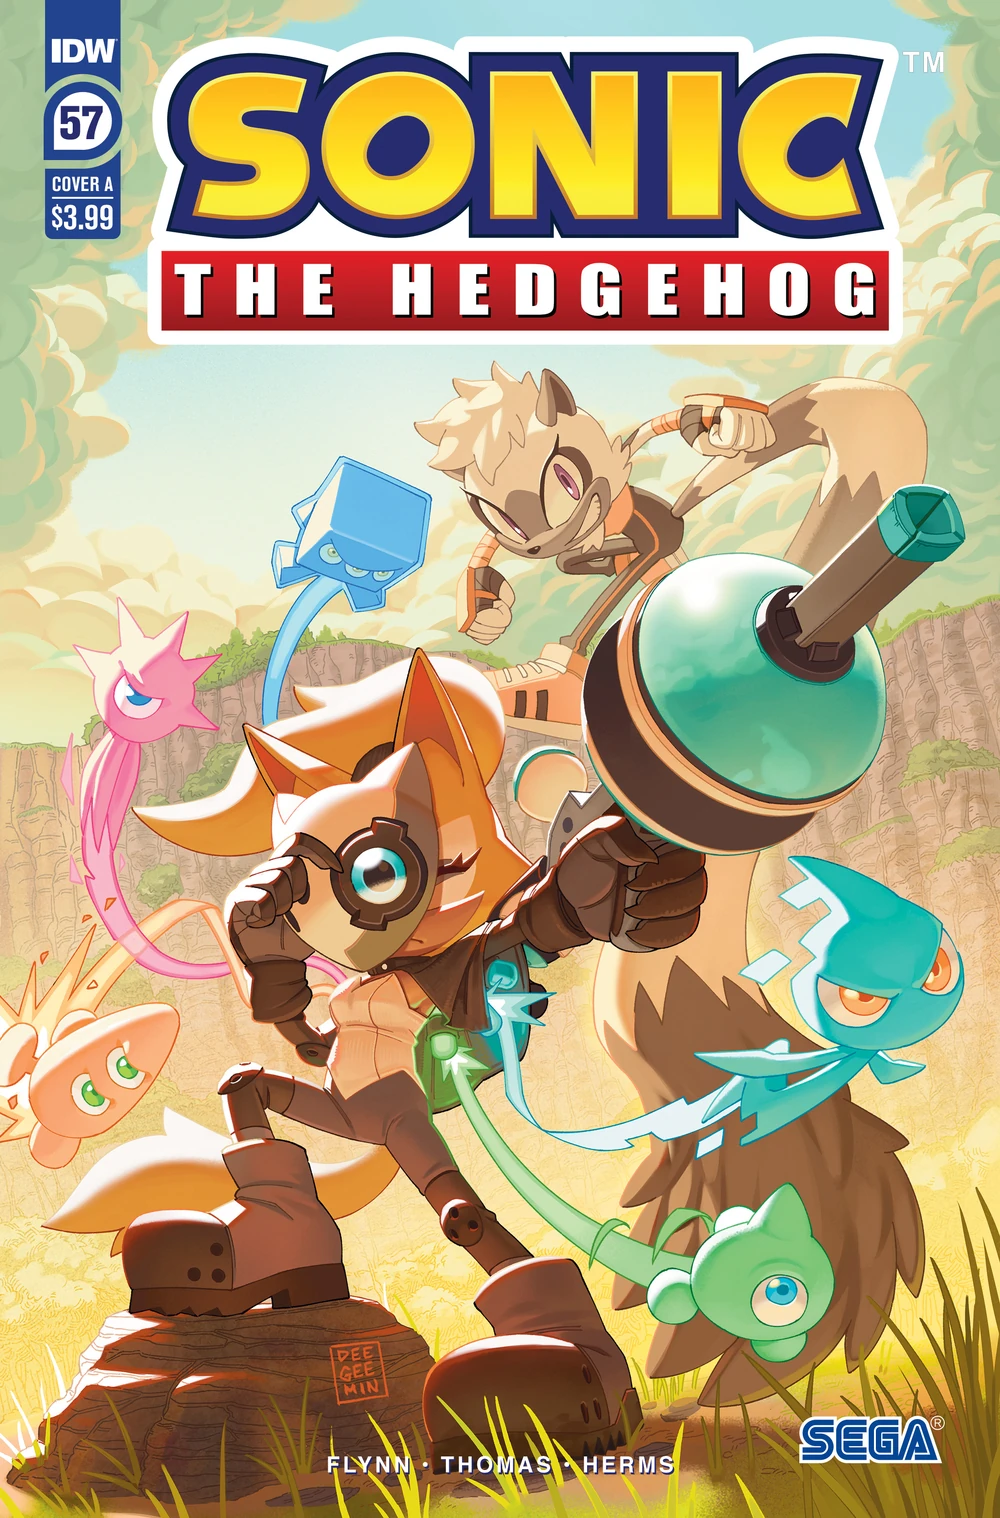 Sonic The Hedgehog #57 Cover A